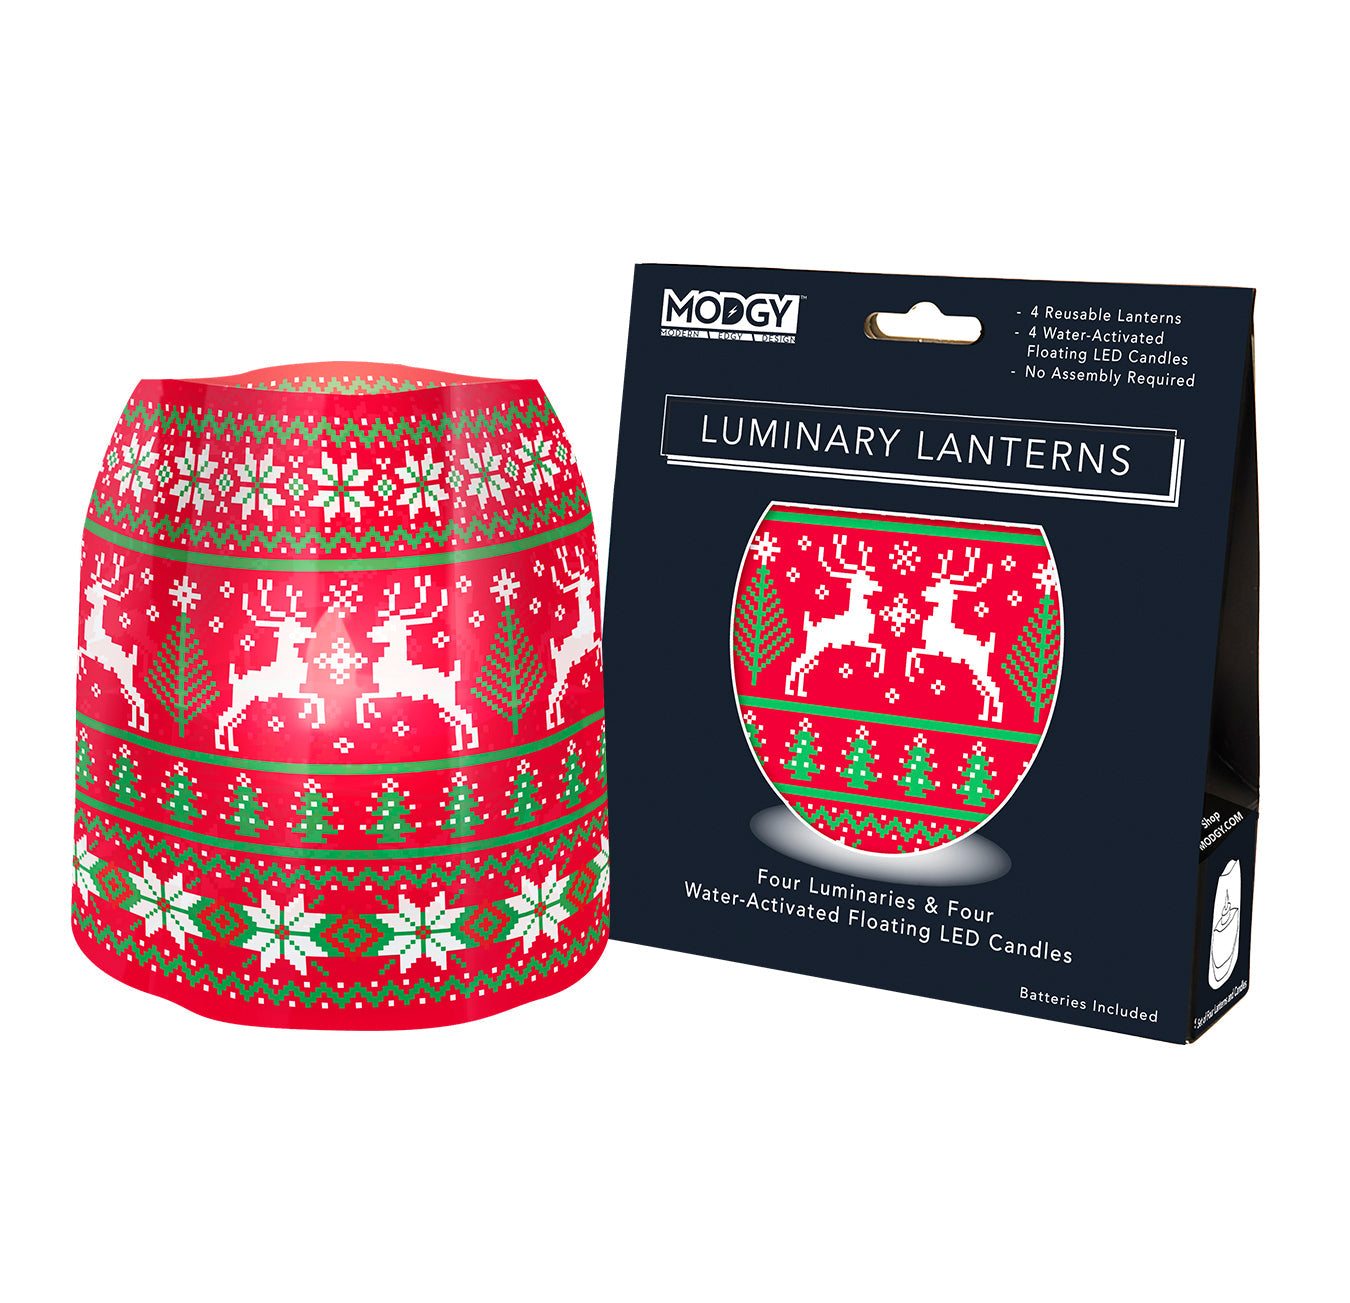 Modgy Luminary Lanterns Deer They Come